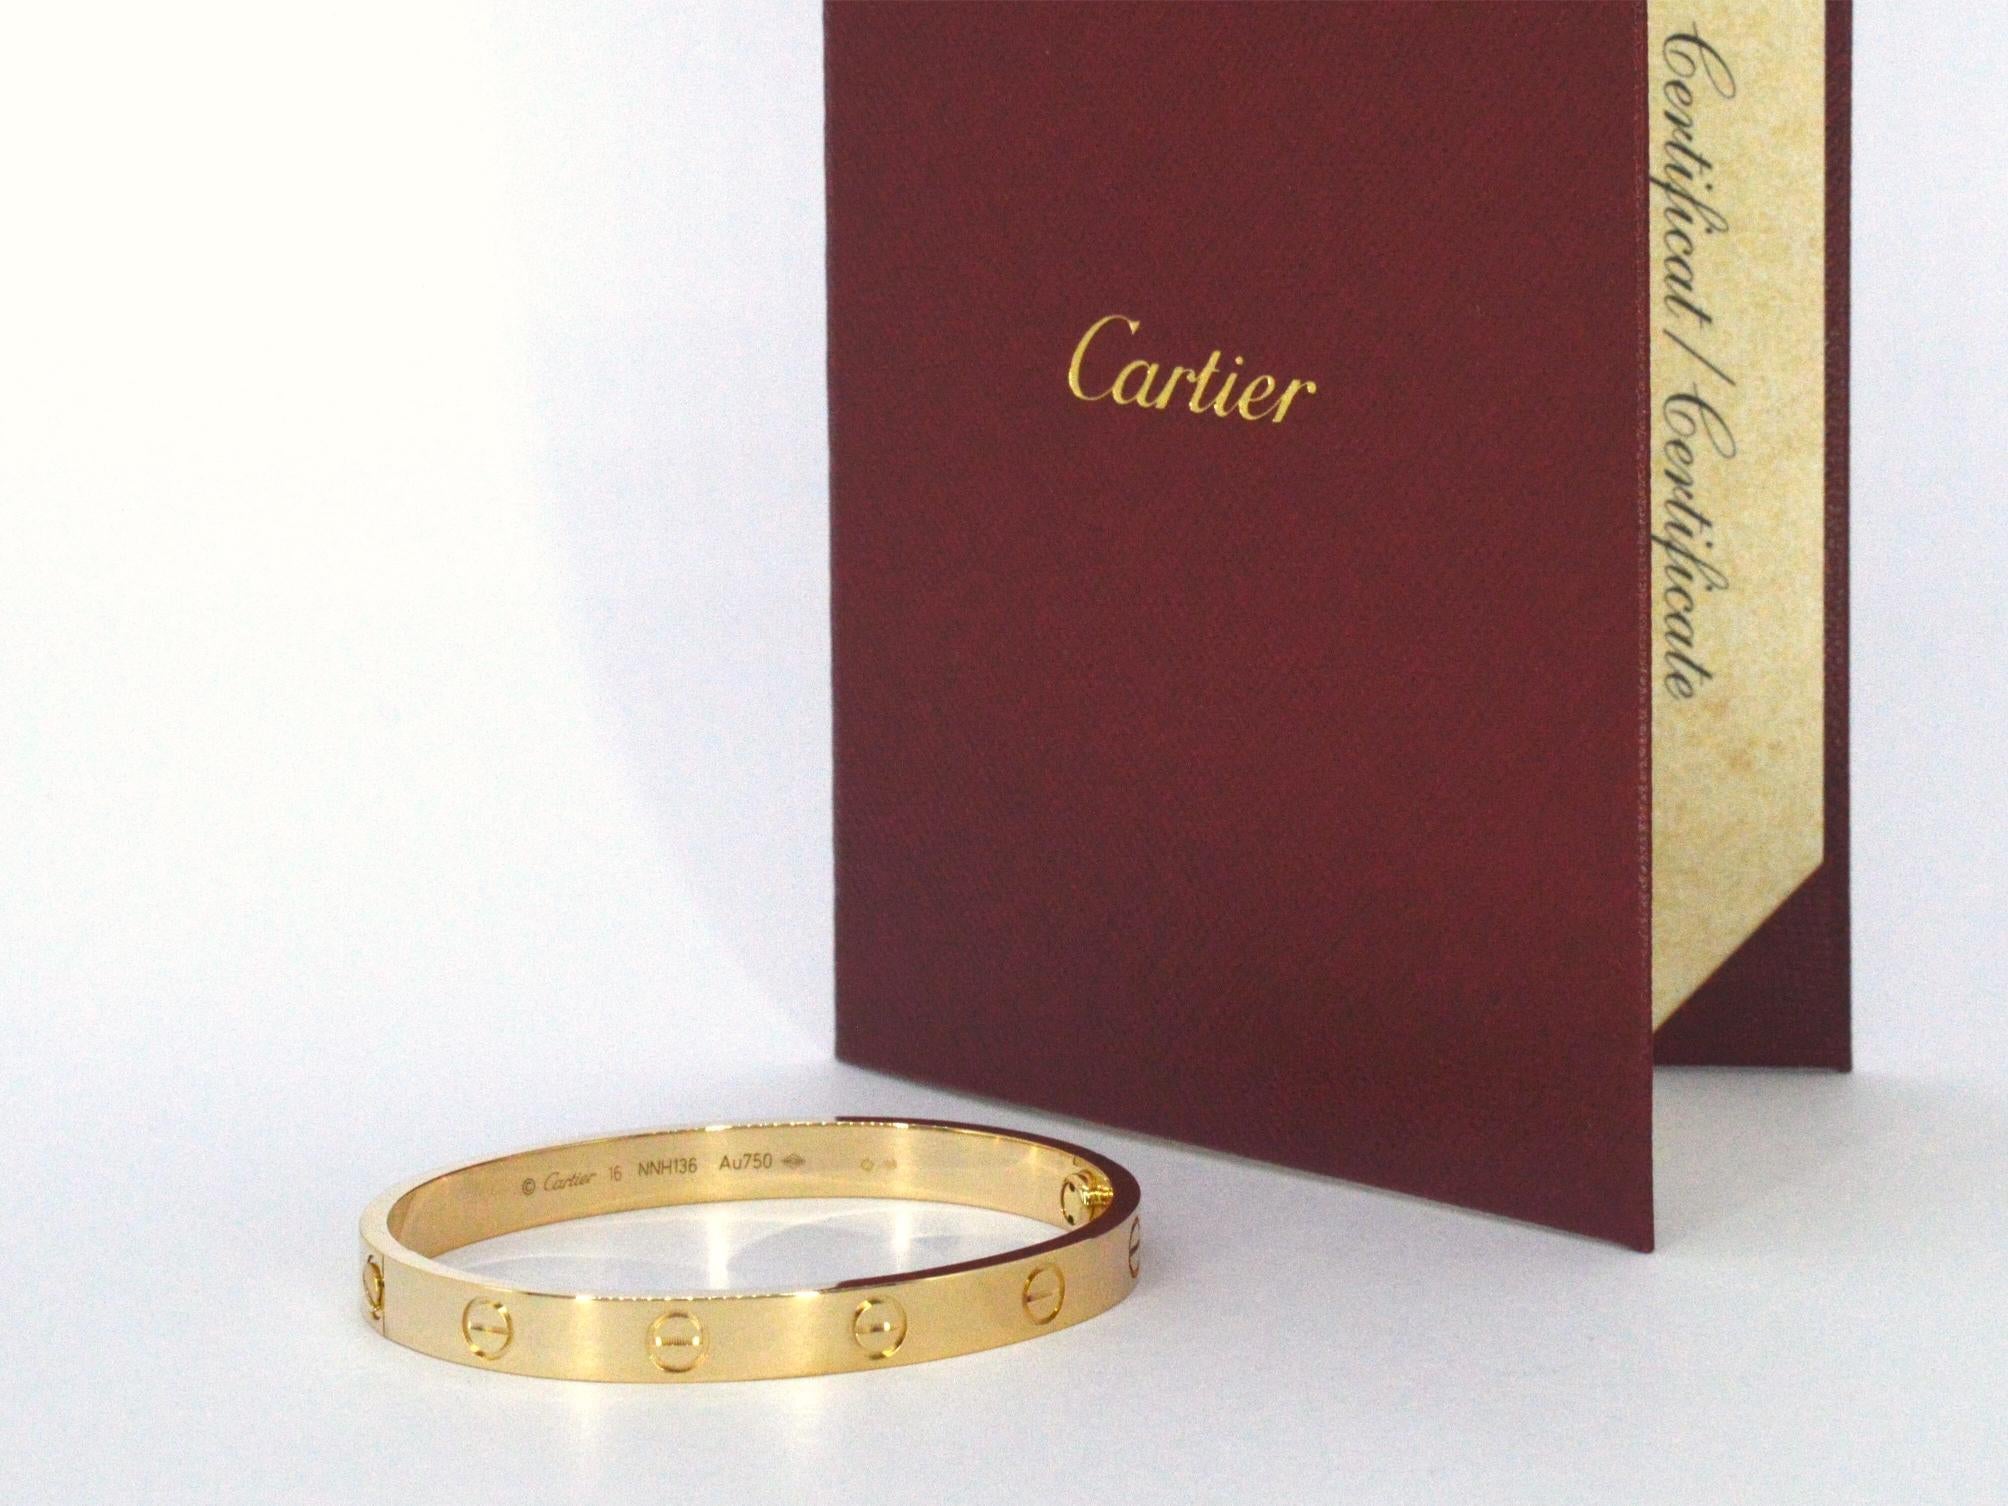 Introducing a stunning Cartier Love Bracelet, featuring a timeless design synonymous with elegance and luxury. This bracelet comes complete with its original box, certificate, and screwdriver, ensuring authenticity and convenience. Crafted from 18K